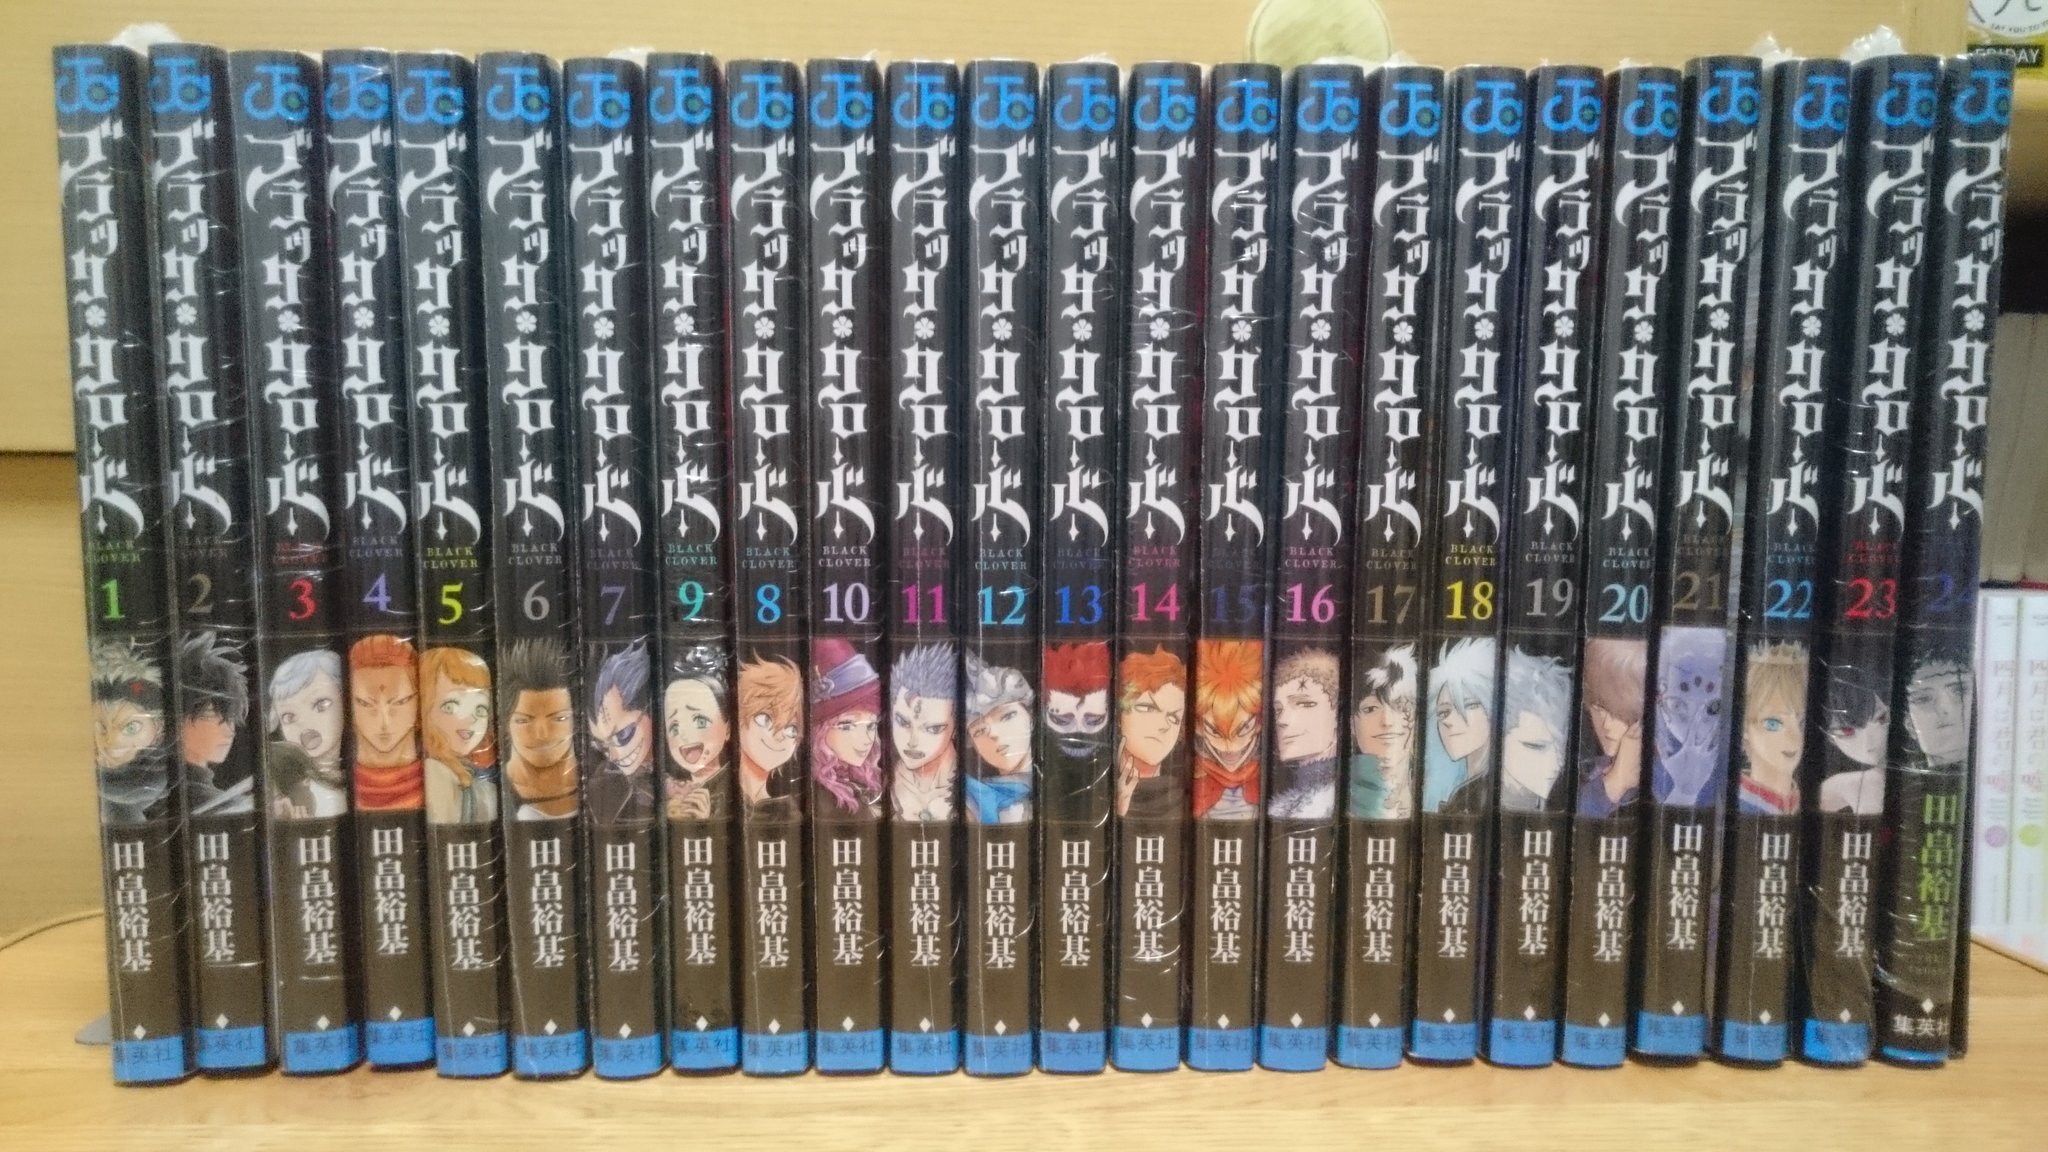 I have finally completed my black clover manga collection after picking up  volume 11 today! Living my best life : r/BlackClover